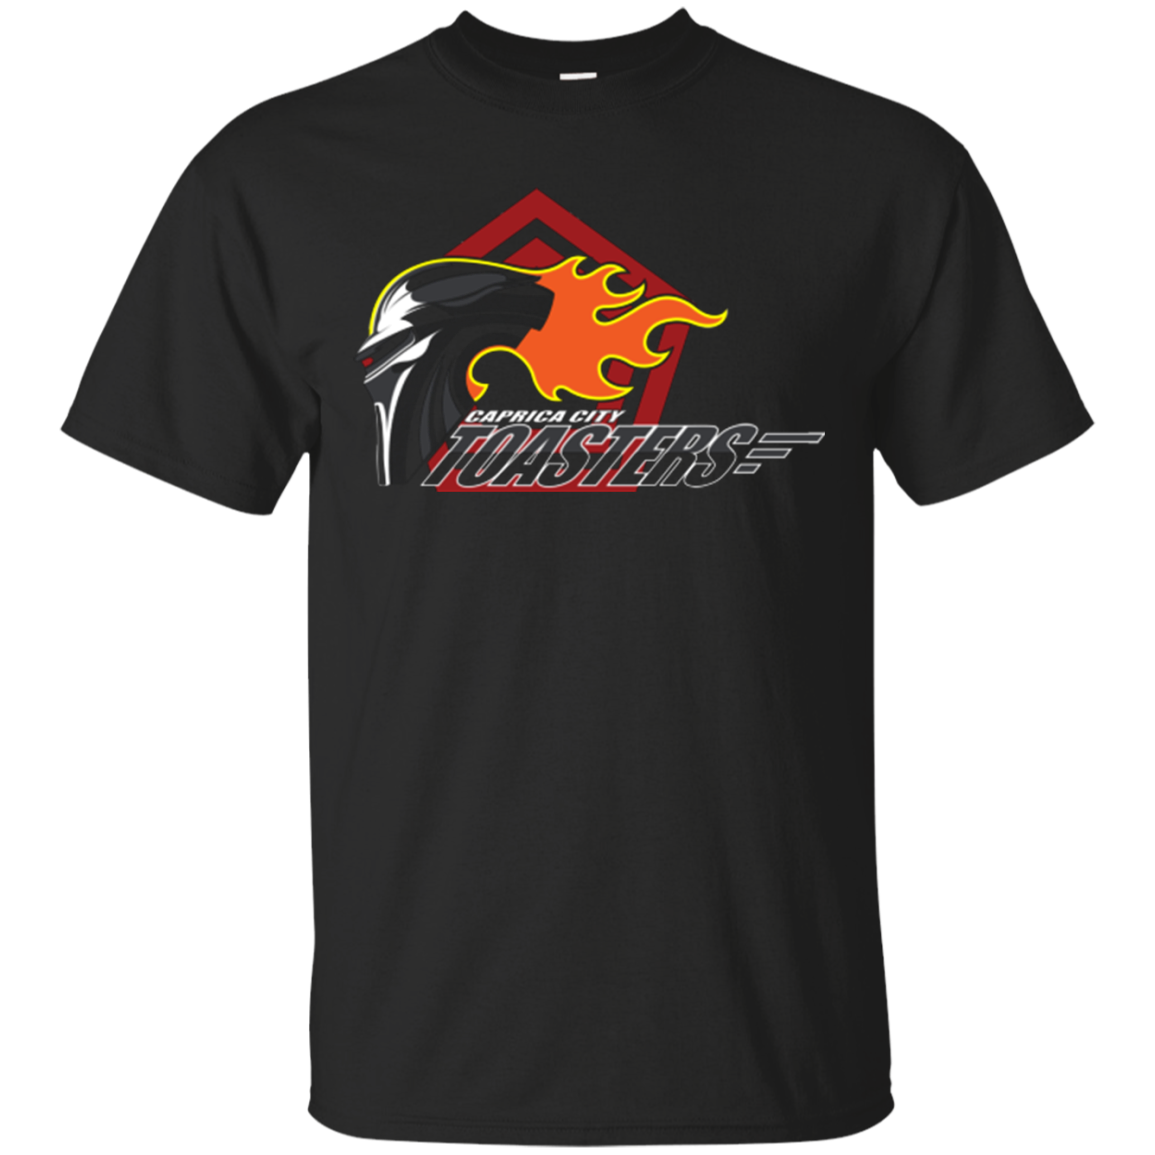 Caprica City Toasters T-Shirt